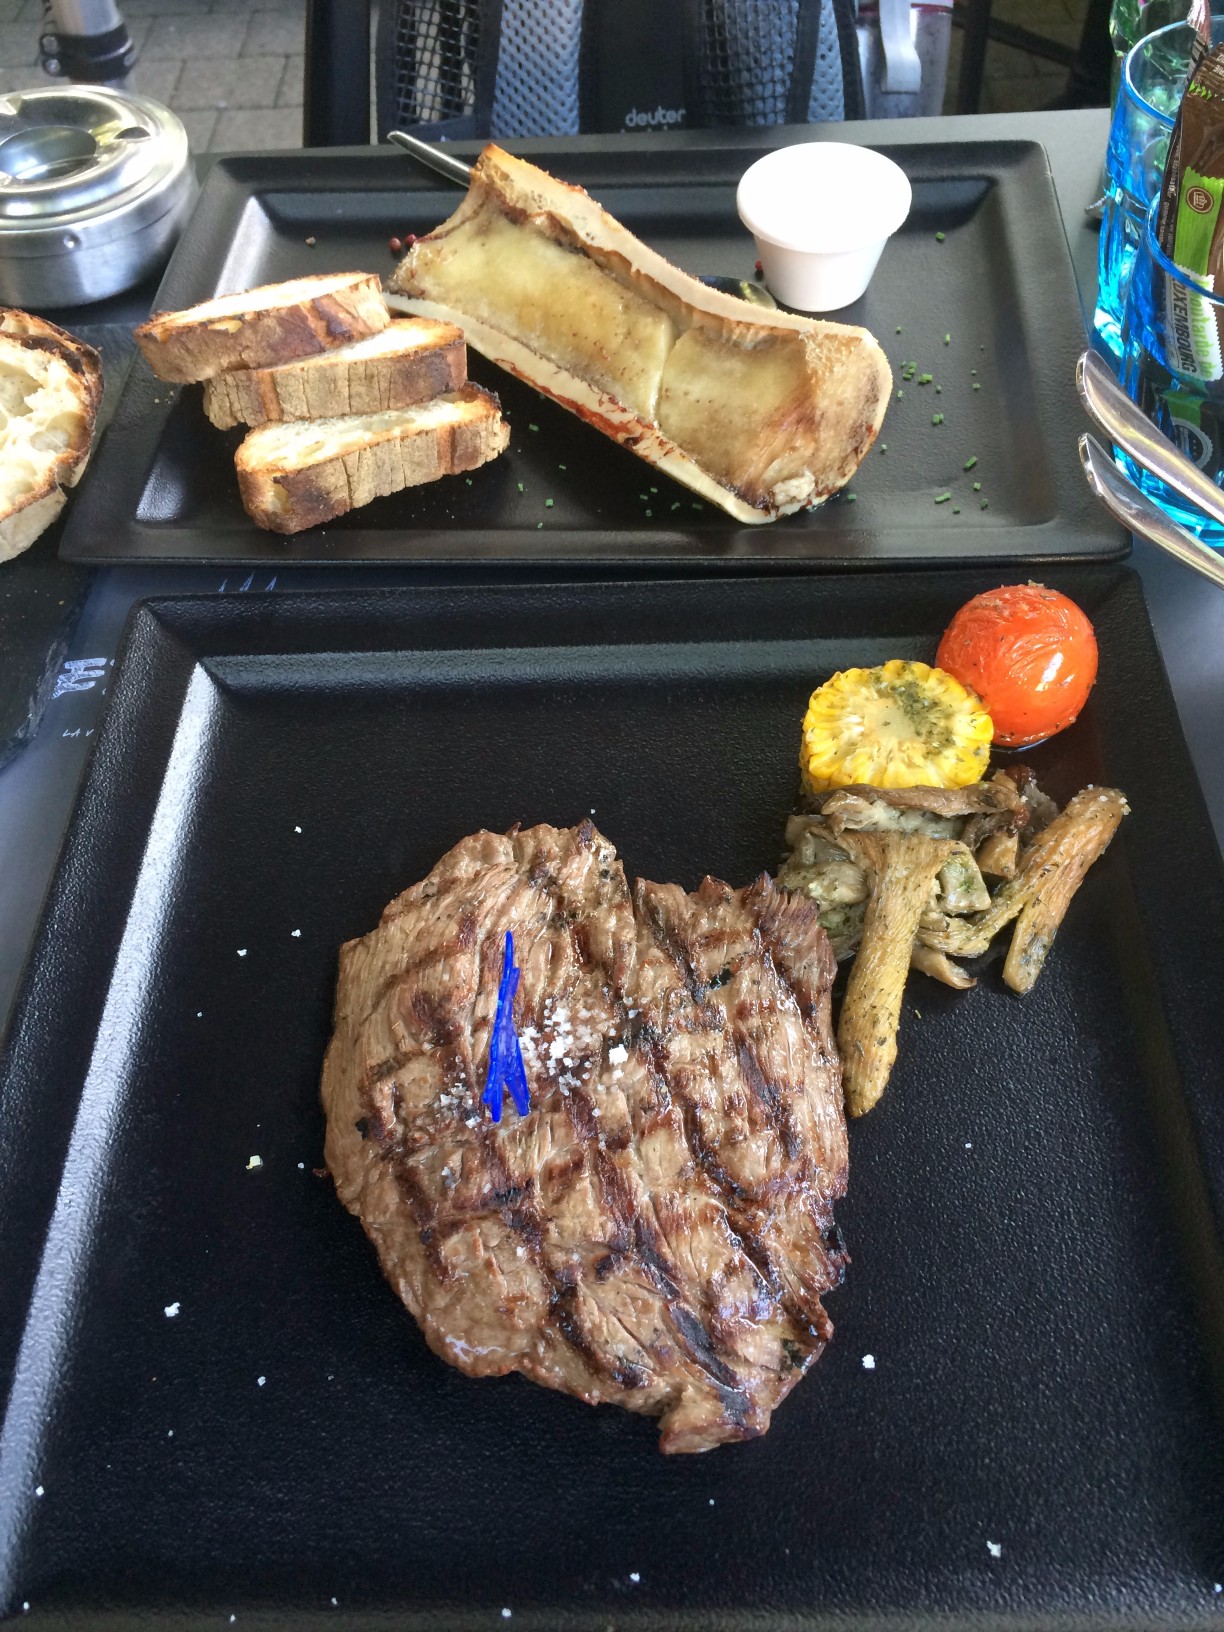 TwoMenAboutTown-Brexit-EU-Luxembourg-steak